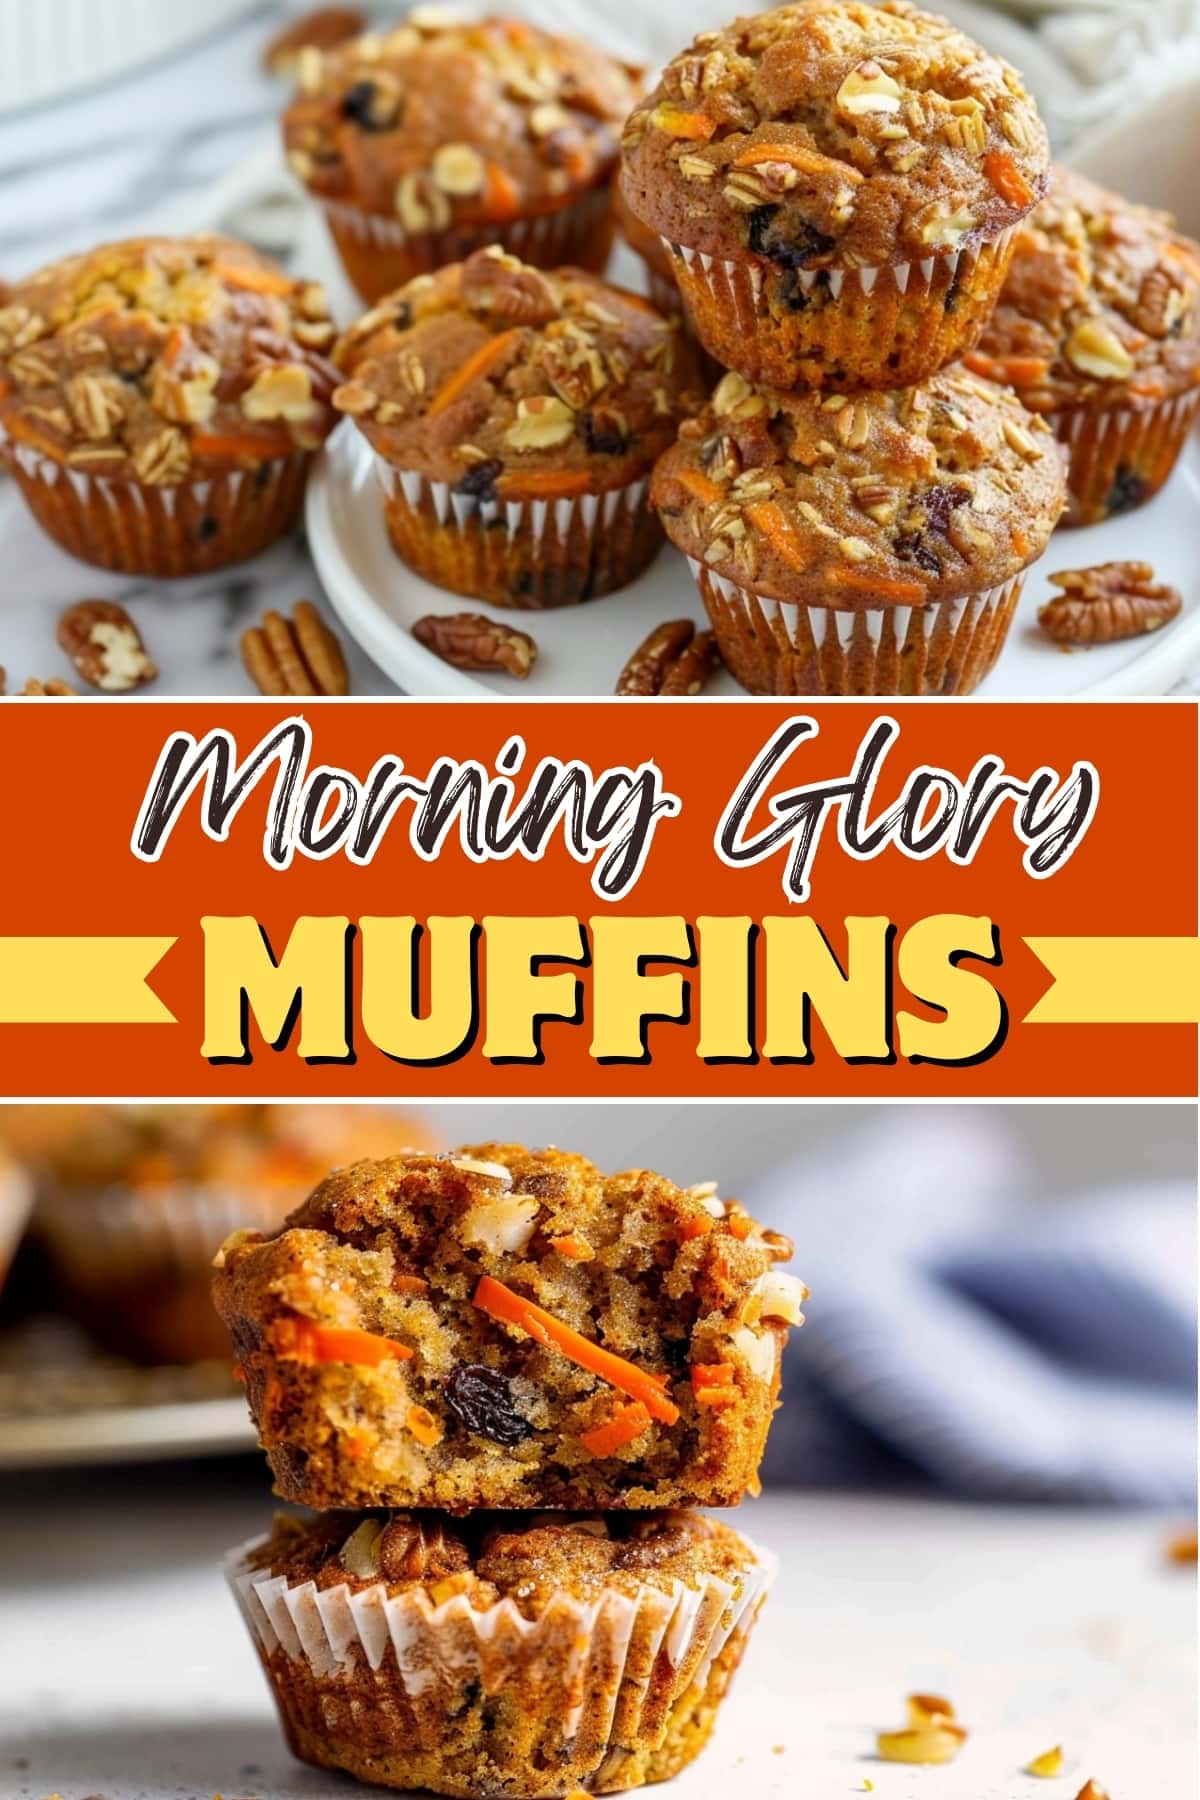 The Best Morning Glory Muffins Recipe